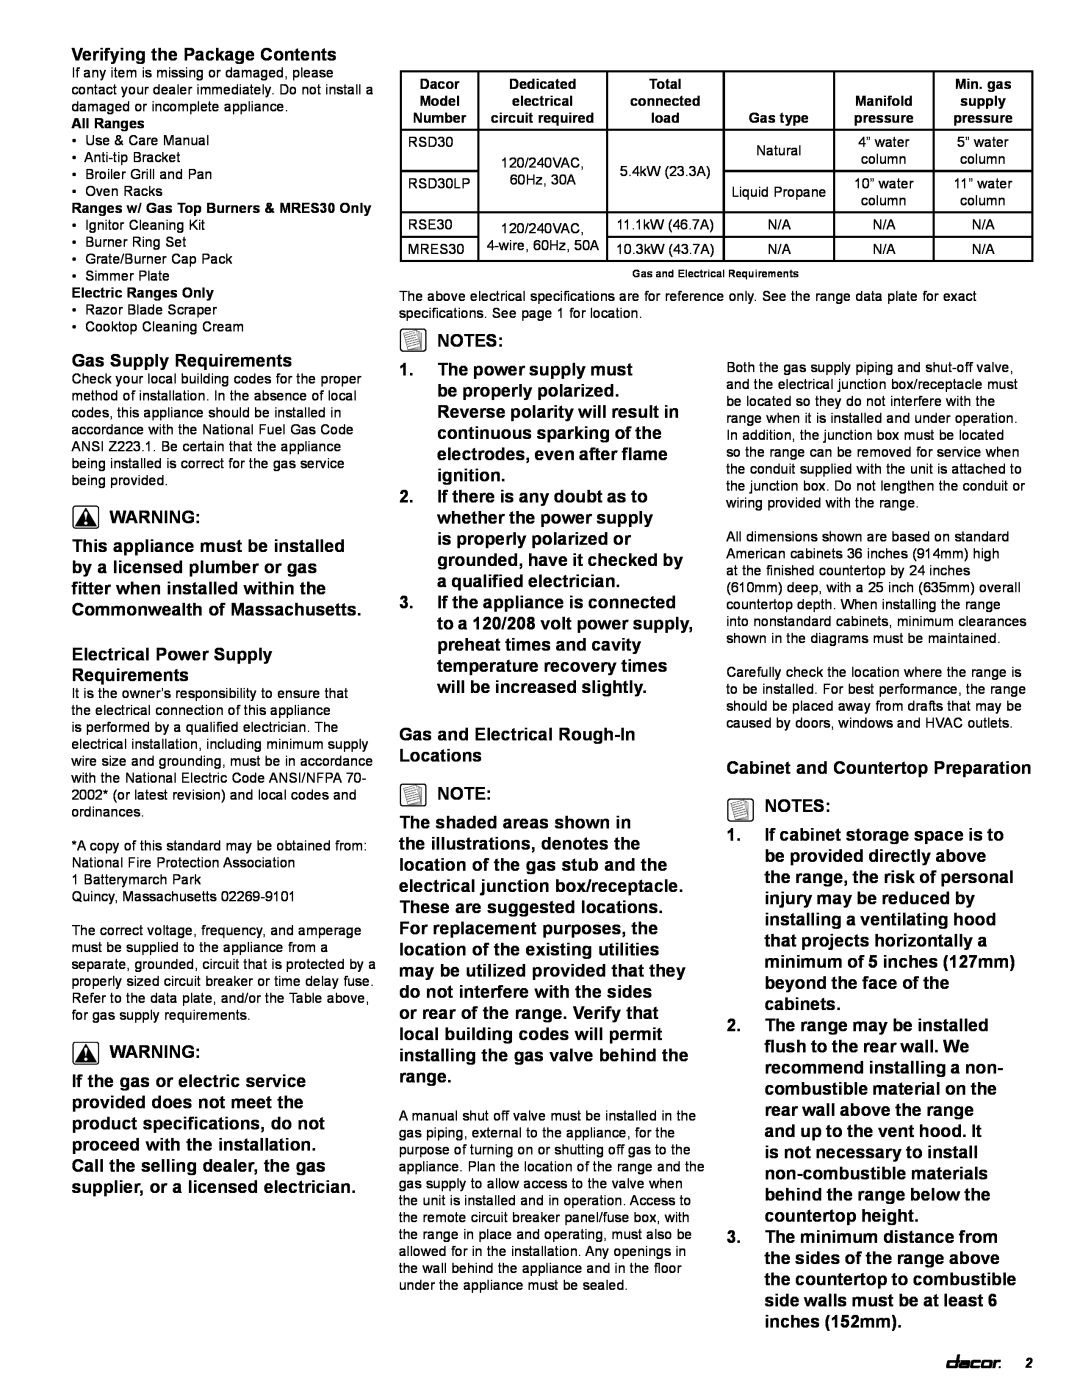 Dacor rsd30, RSE30, MRES30 installation instructions Verifying the Package Contents 